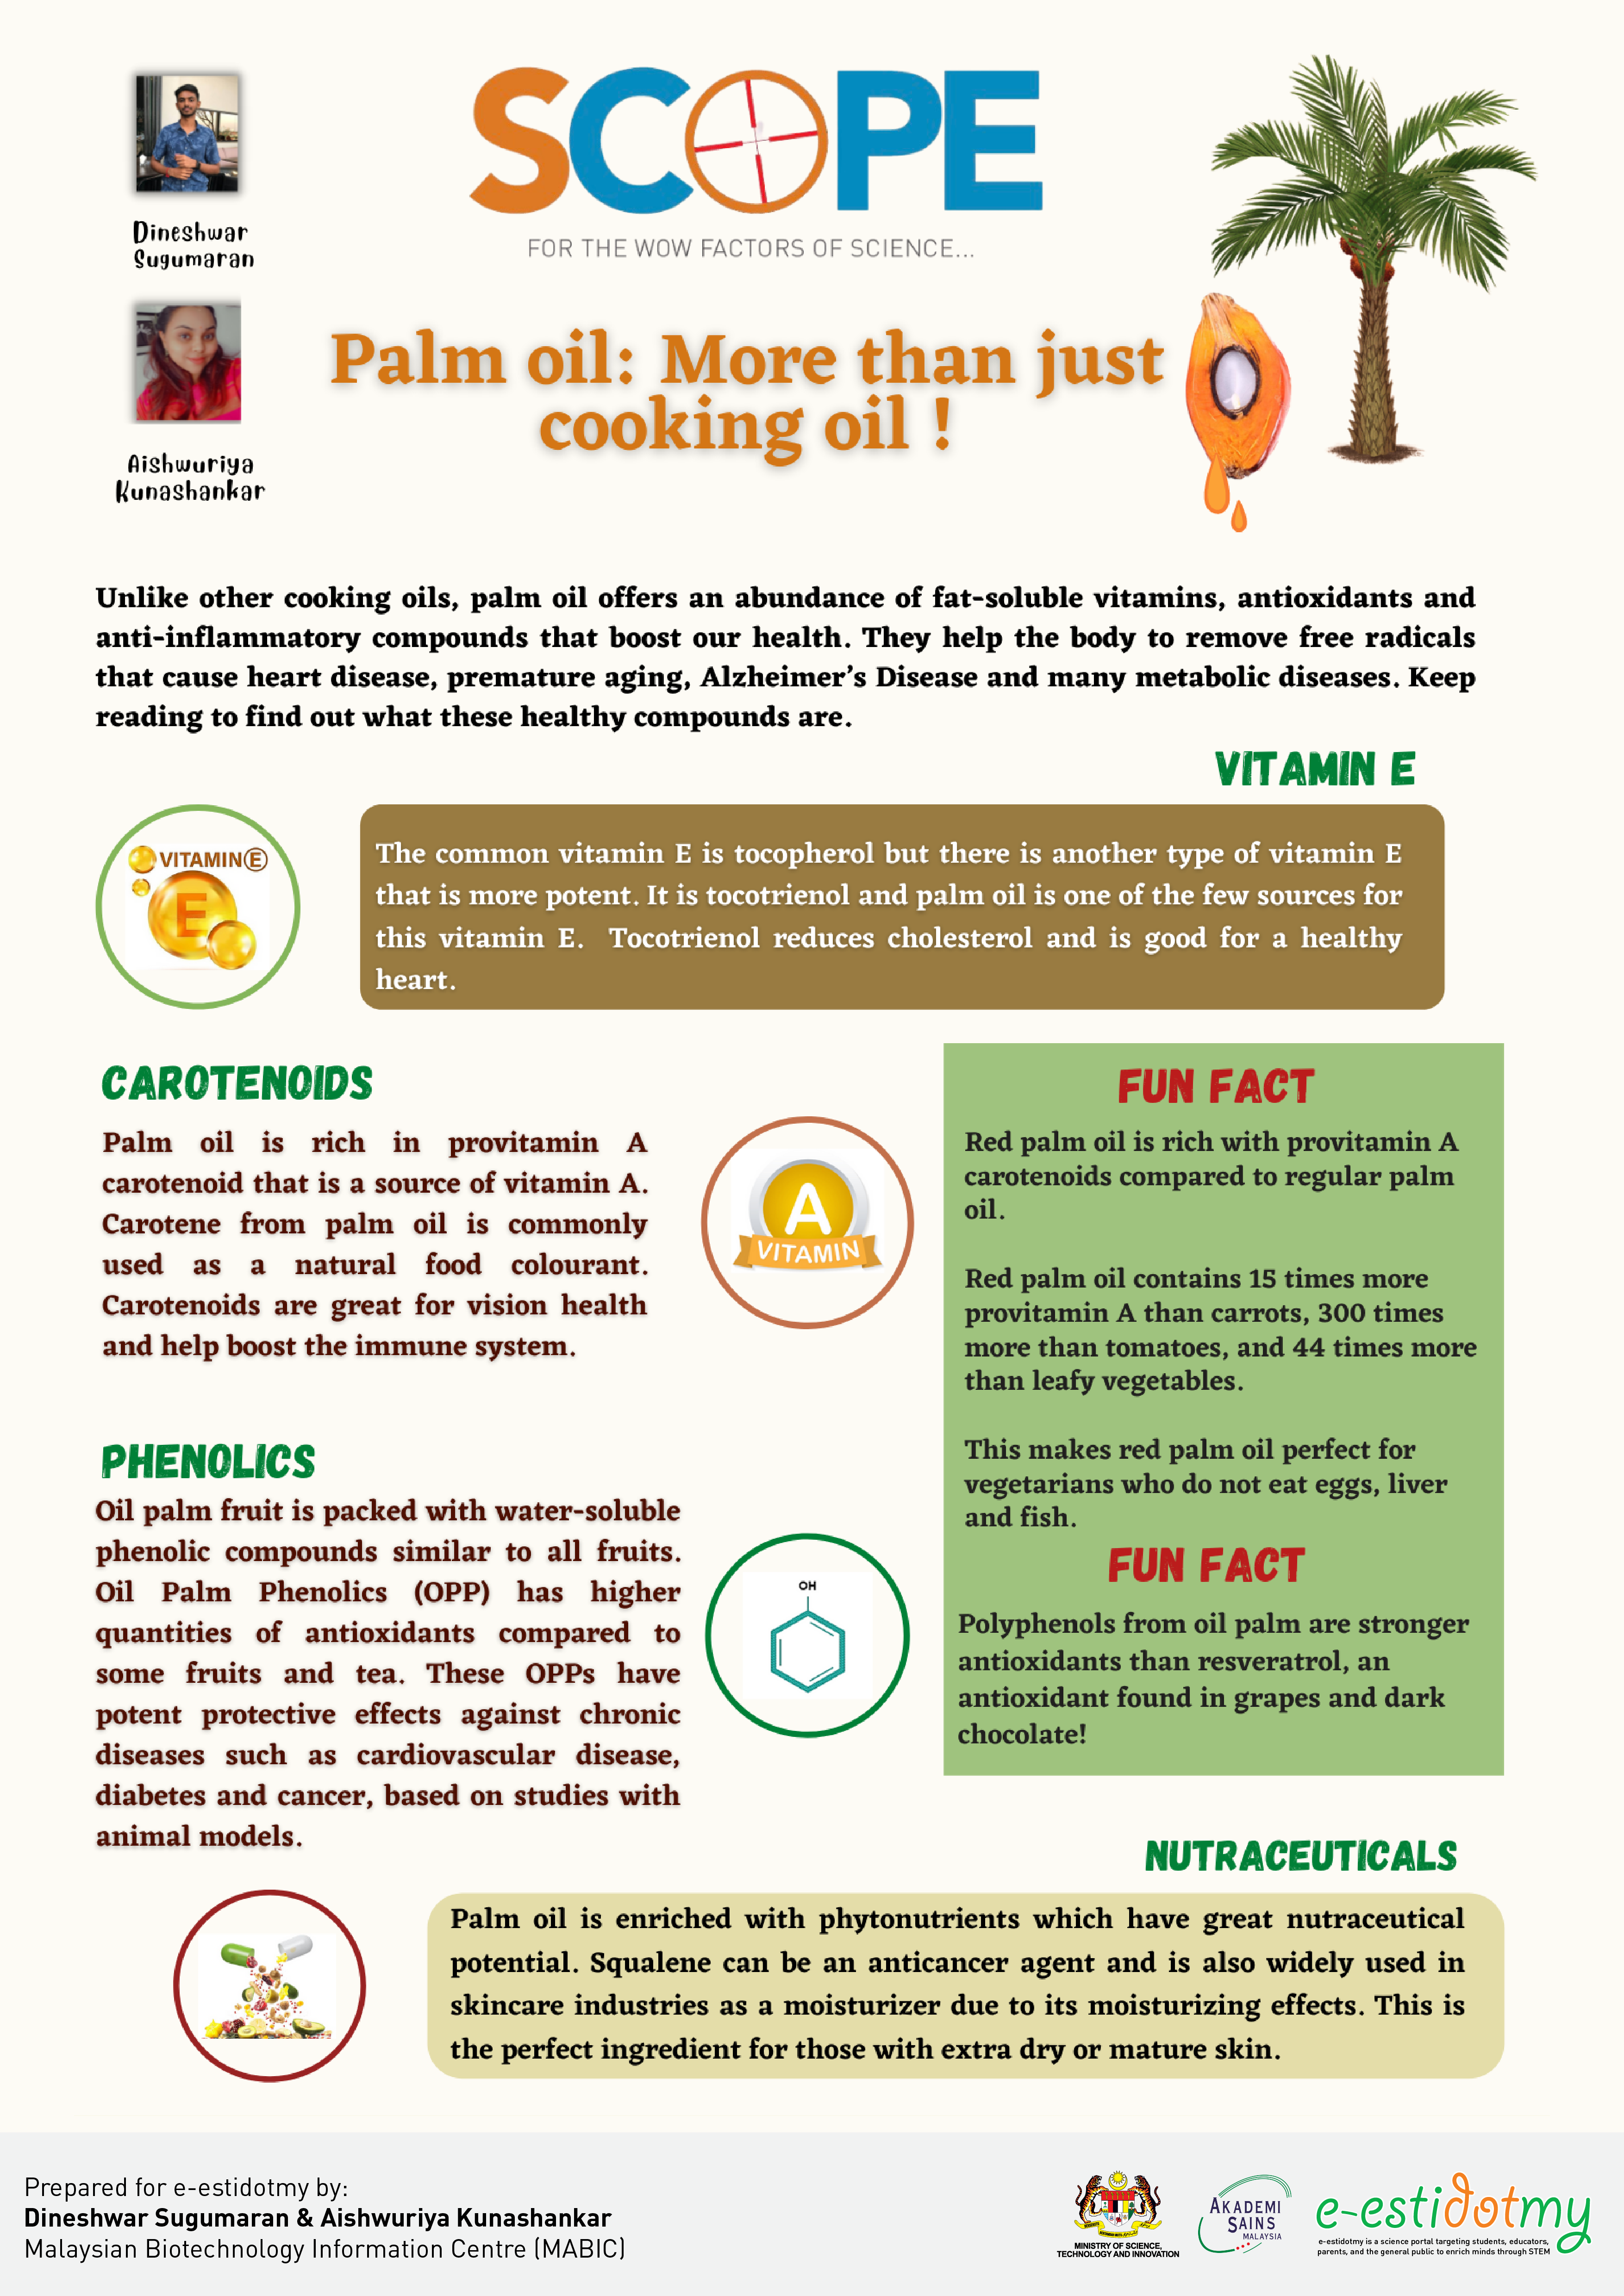 palm oil is more than just cooking oil